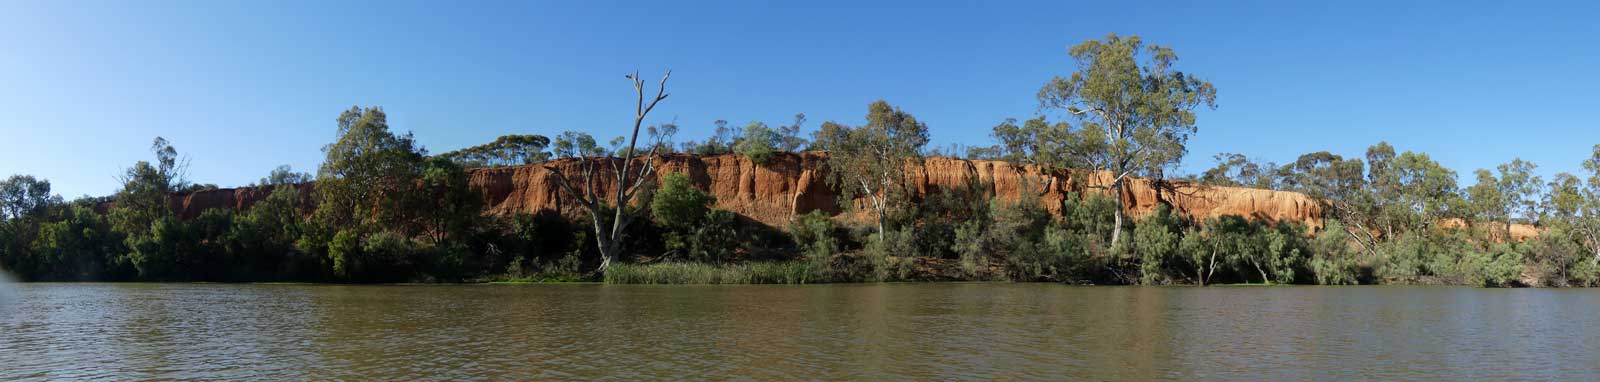 Red clay banks along the river